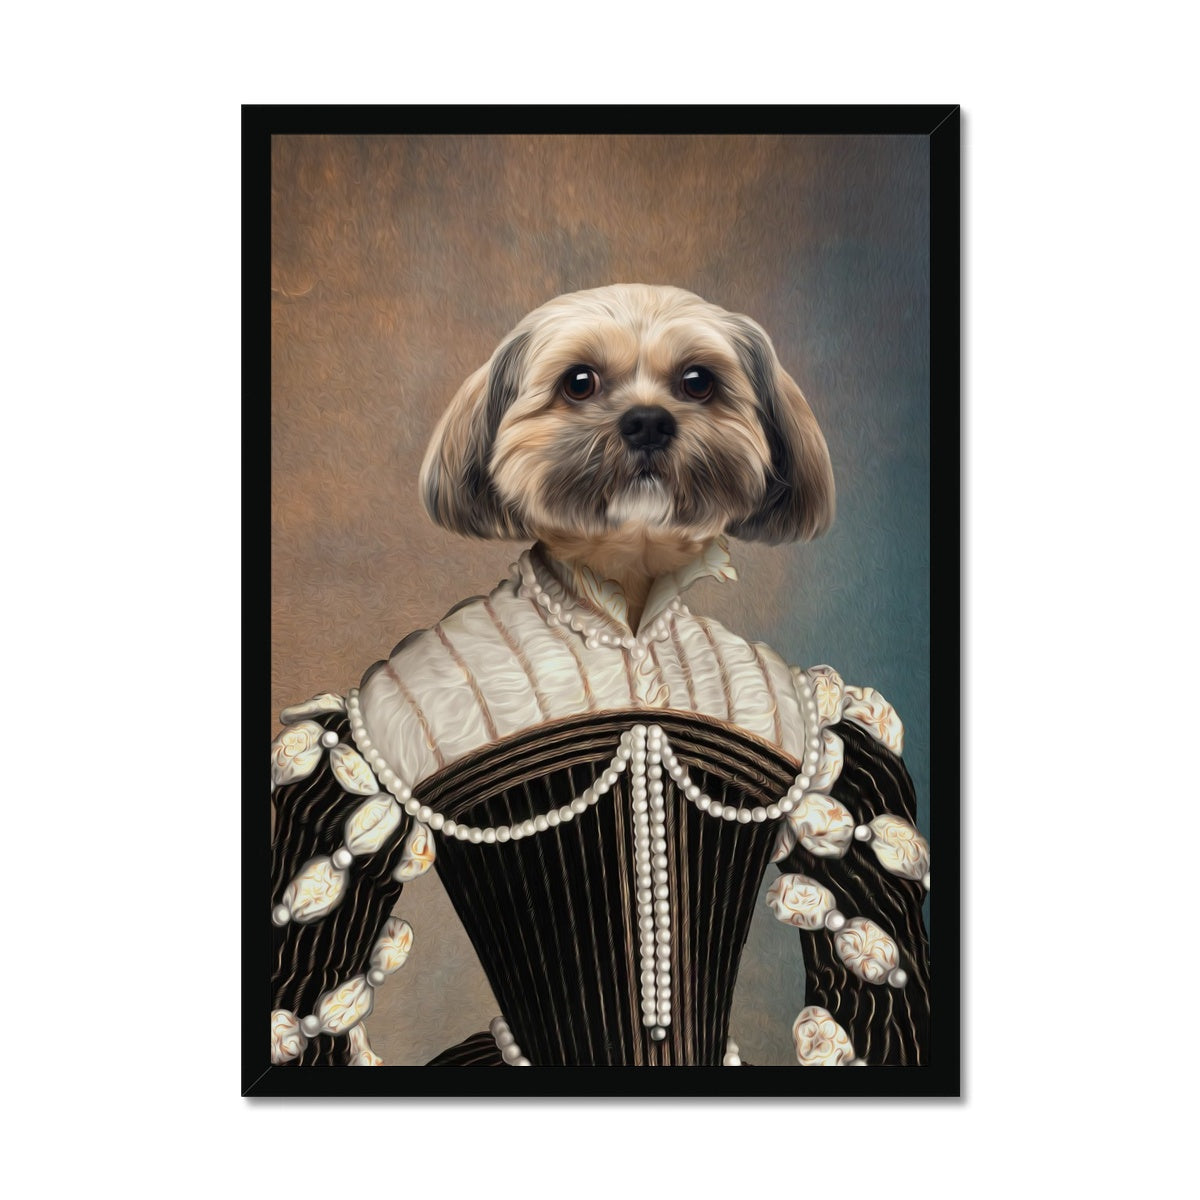 The Marquise: Custom Framed Pet Portrait  - Paw & Glory, paw and glory, pet portraits in oils, personalized pet and owner canvas, hogwarts dog houses, my pet painting, painting pets, aristocrat dog painting, pet portrait